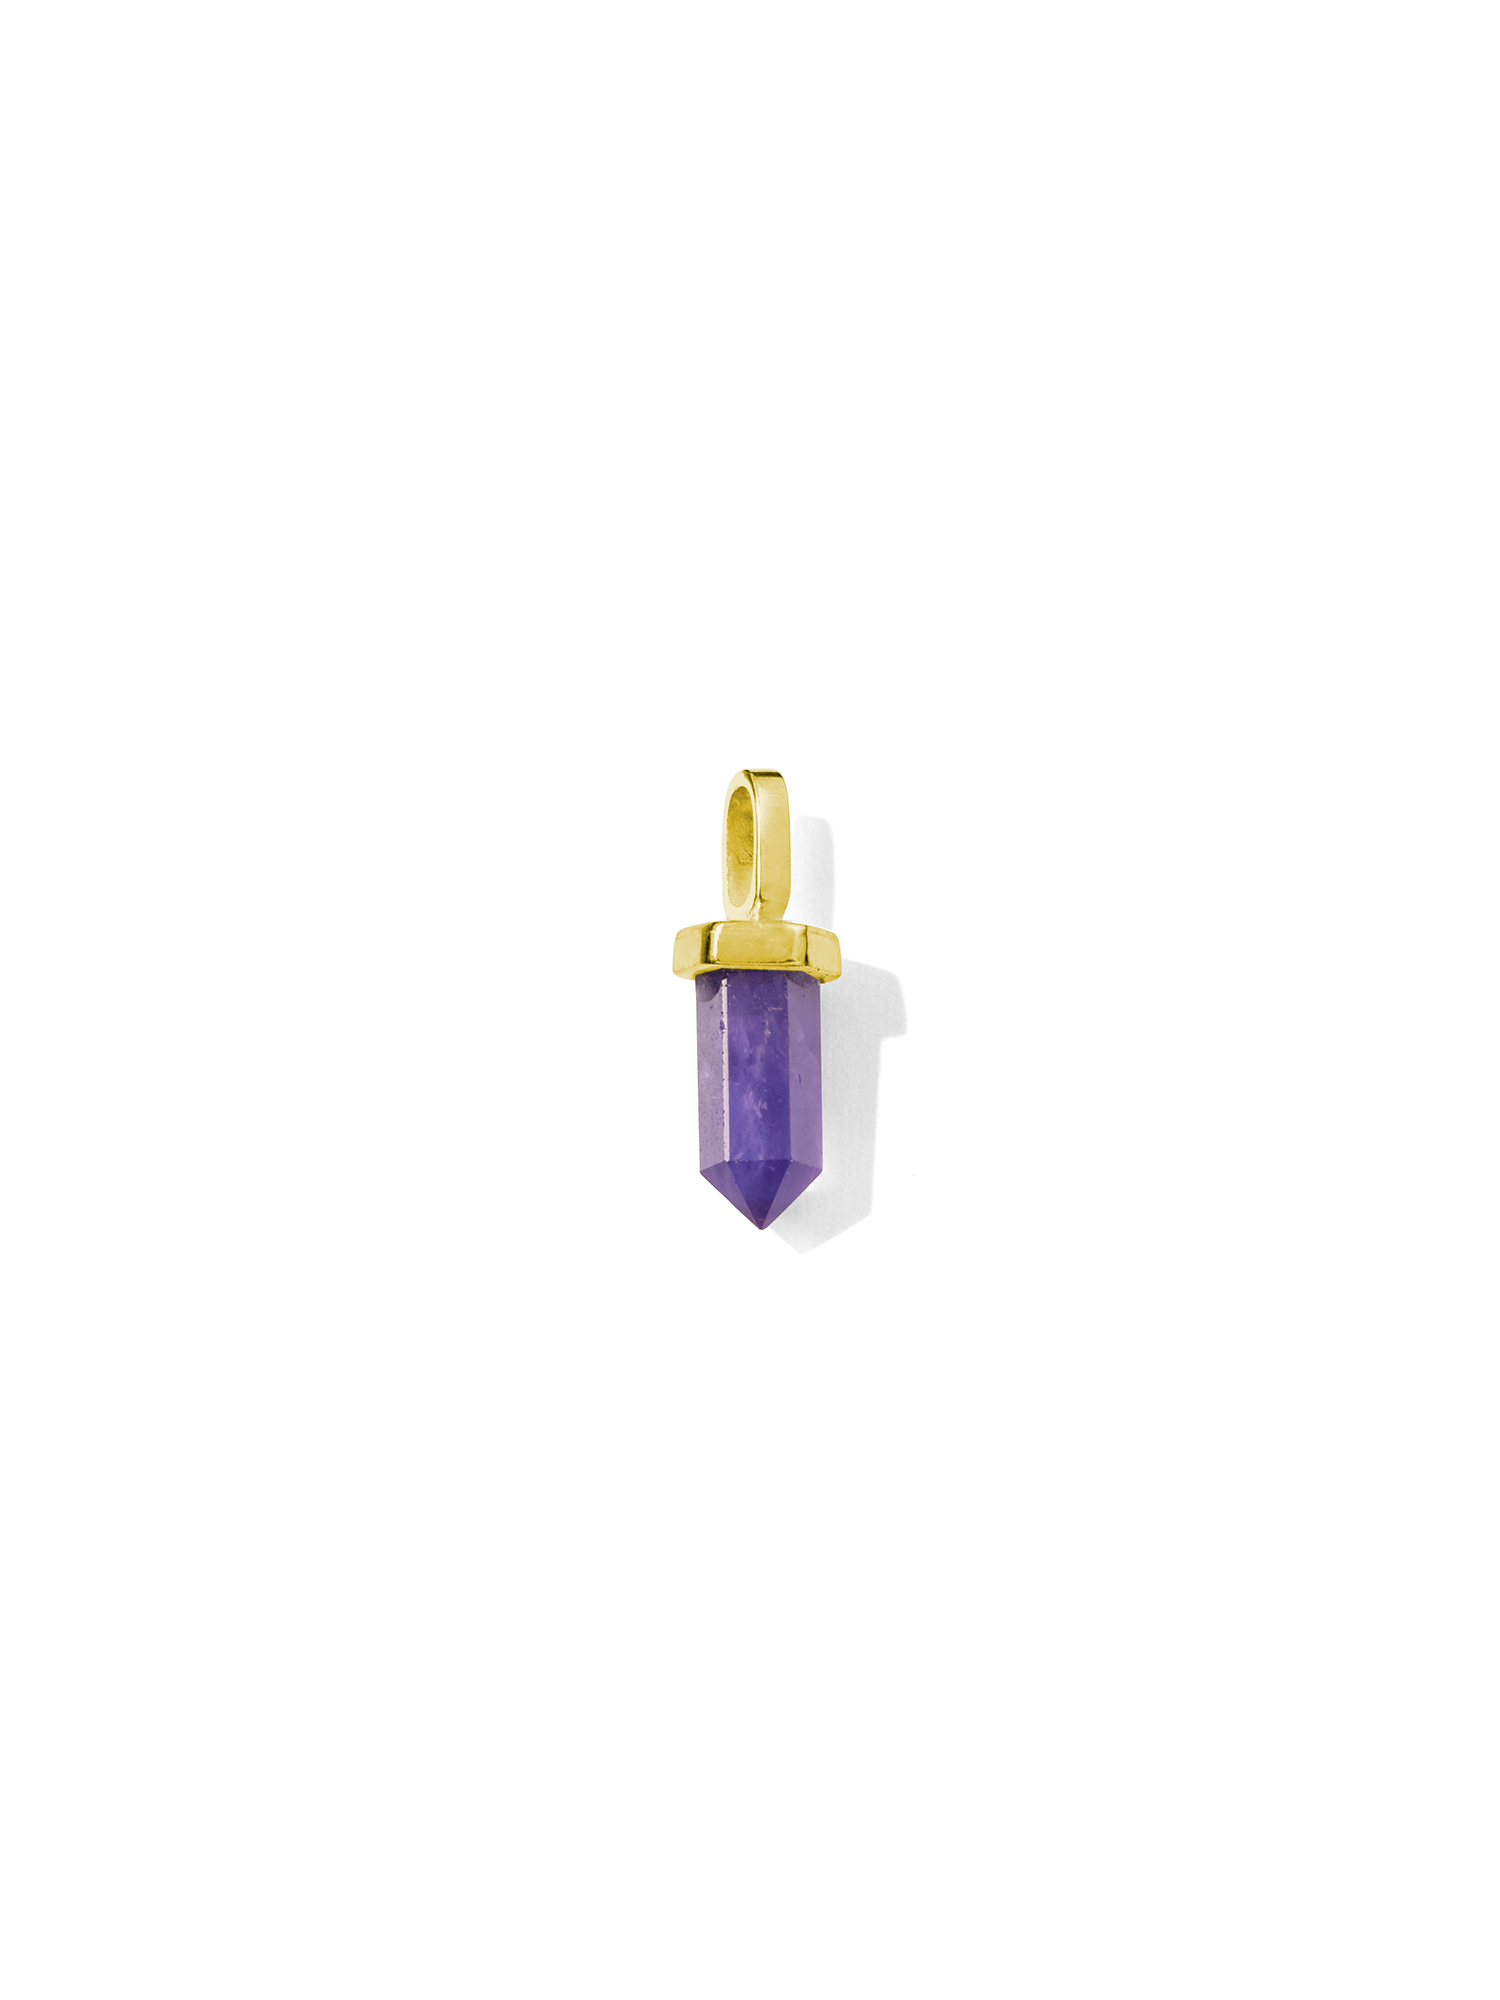 terminated crystal necklace charm | amethyst